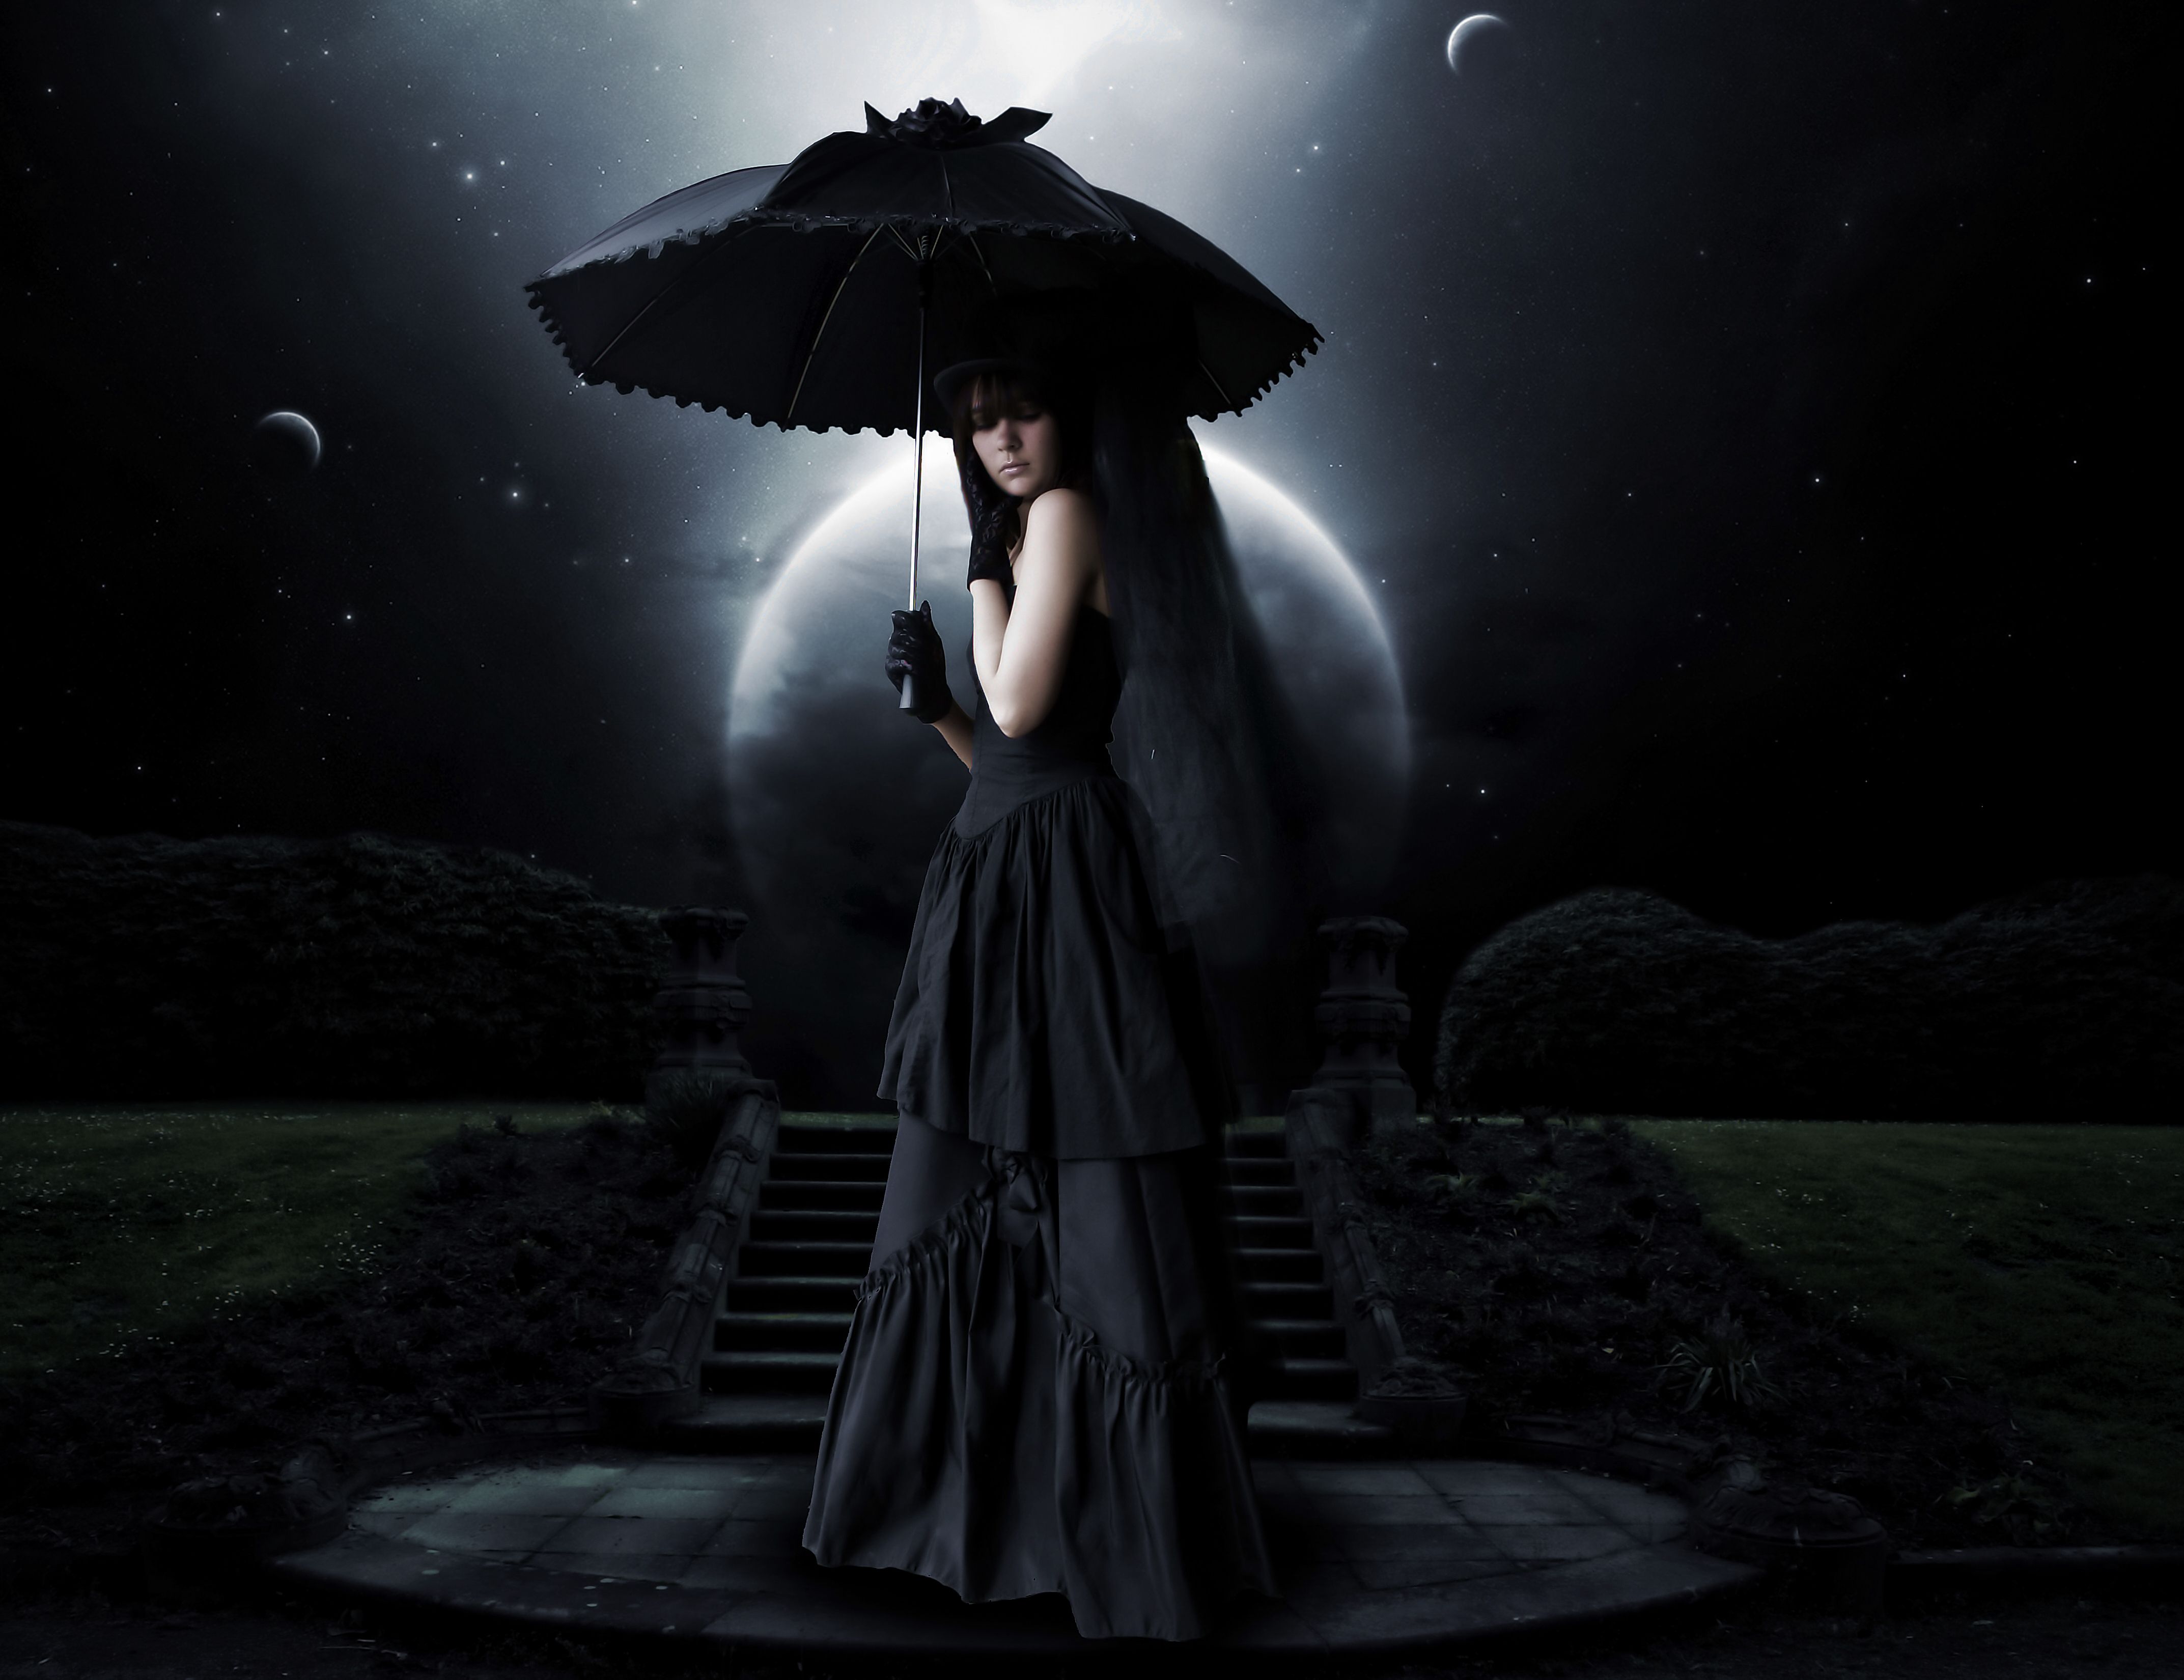 Gothic girl with umbrella in the moonlight - Gothic